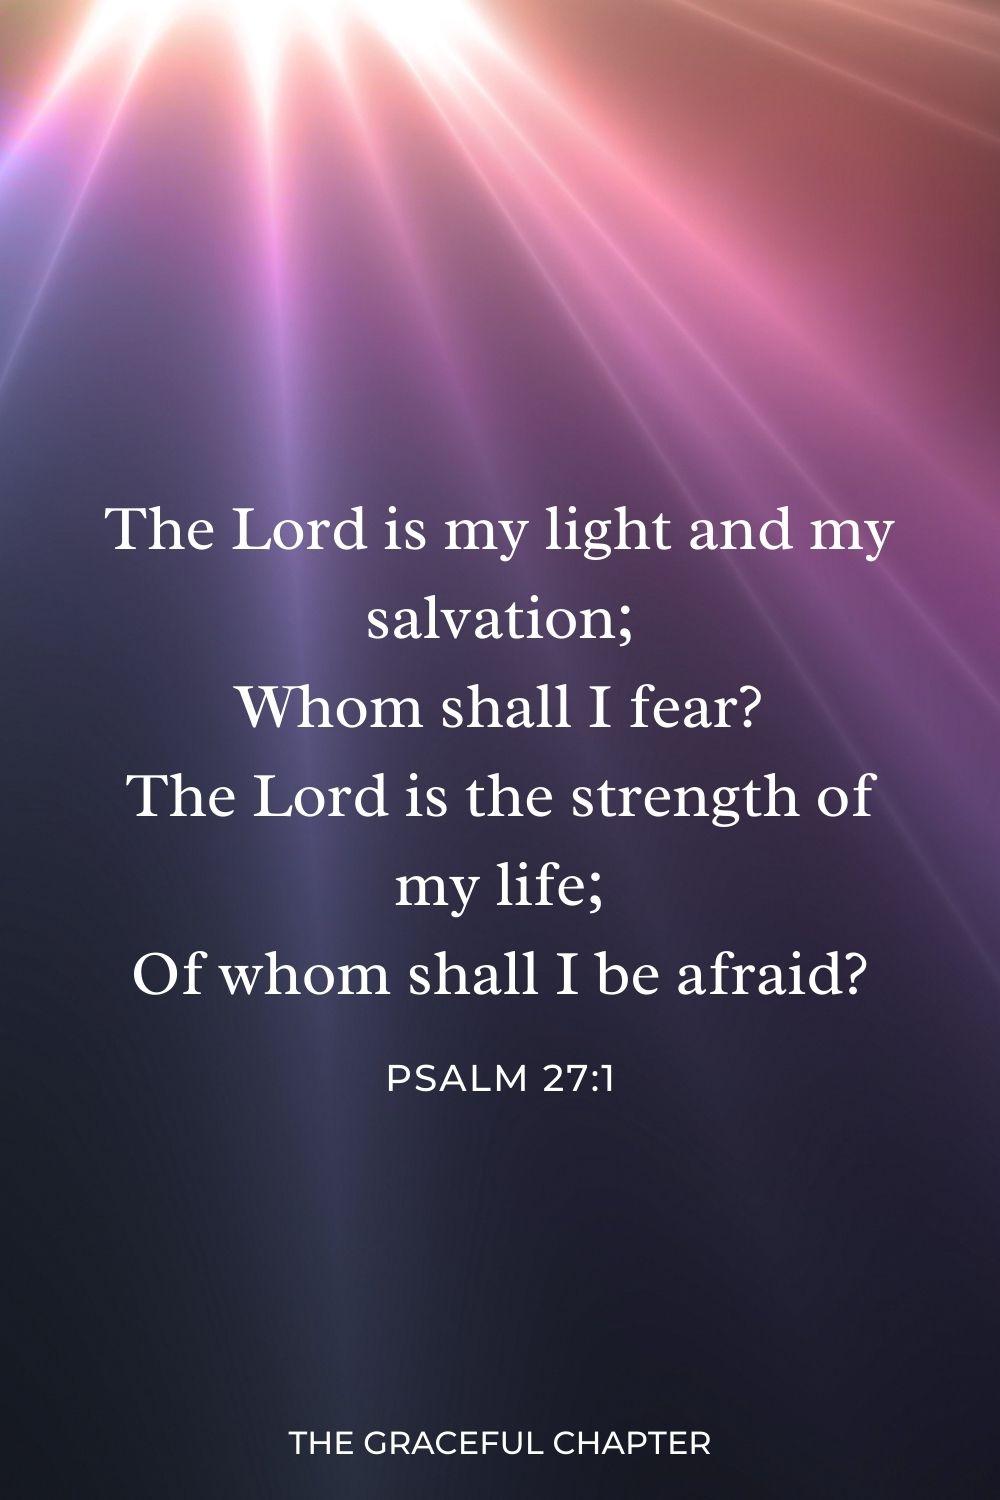 The Lord is my light and my salvation;
Whom shall I fear?
The Lord is the strength of my life;
Of whom shall I be afraid? Psalm 27:1